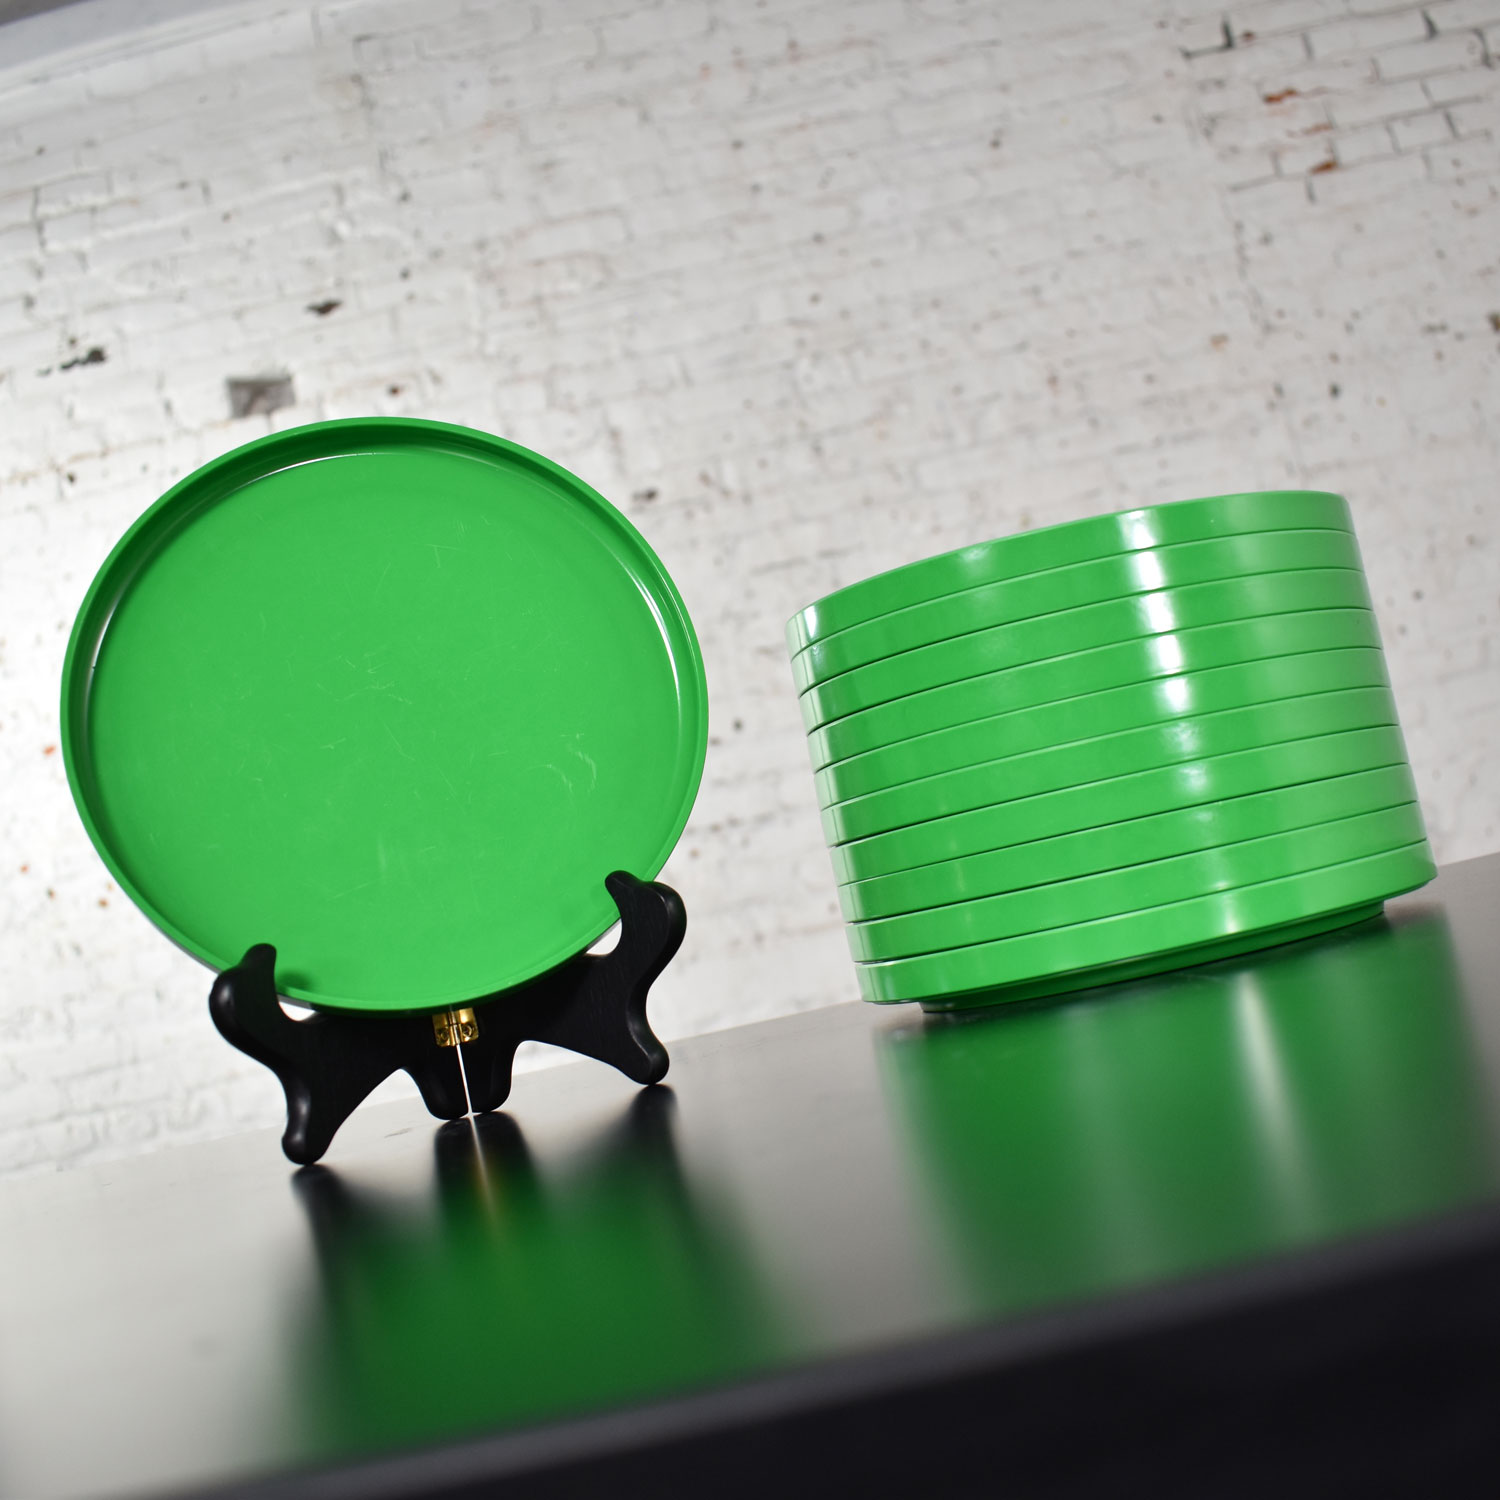 Heller Dinnerware by Lella and Massimo Vignelli in Kelly Green 58 Pieces Plus Napkins